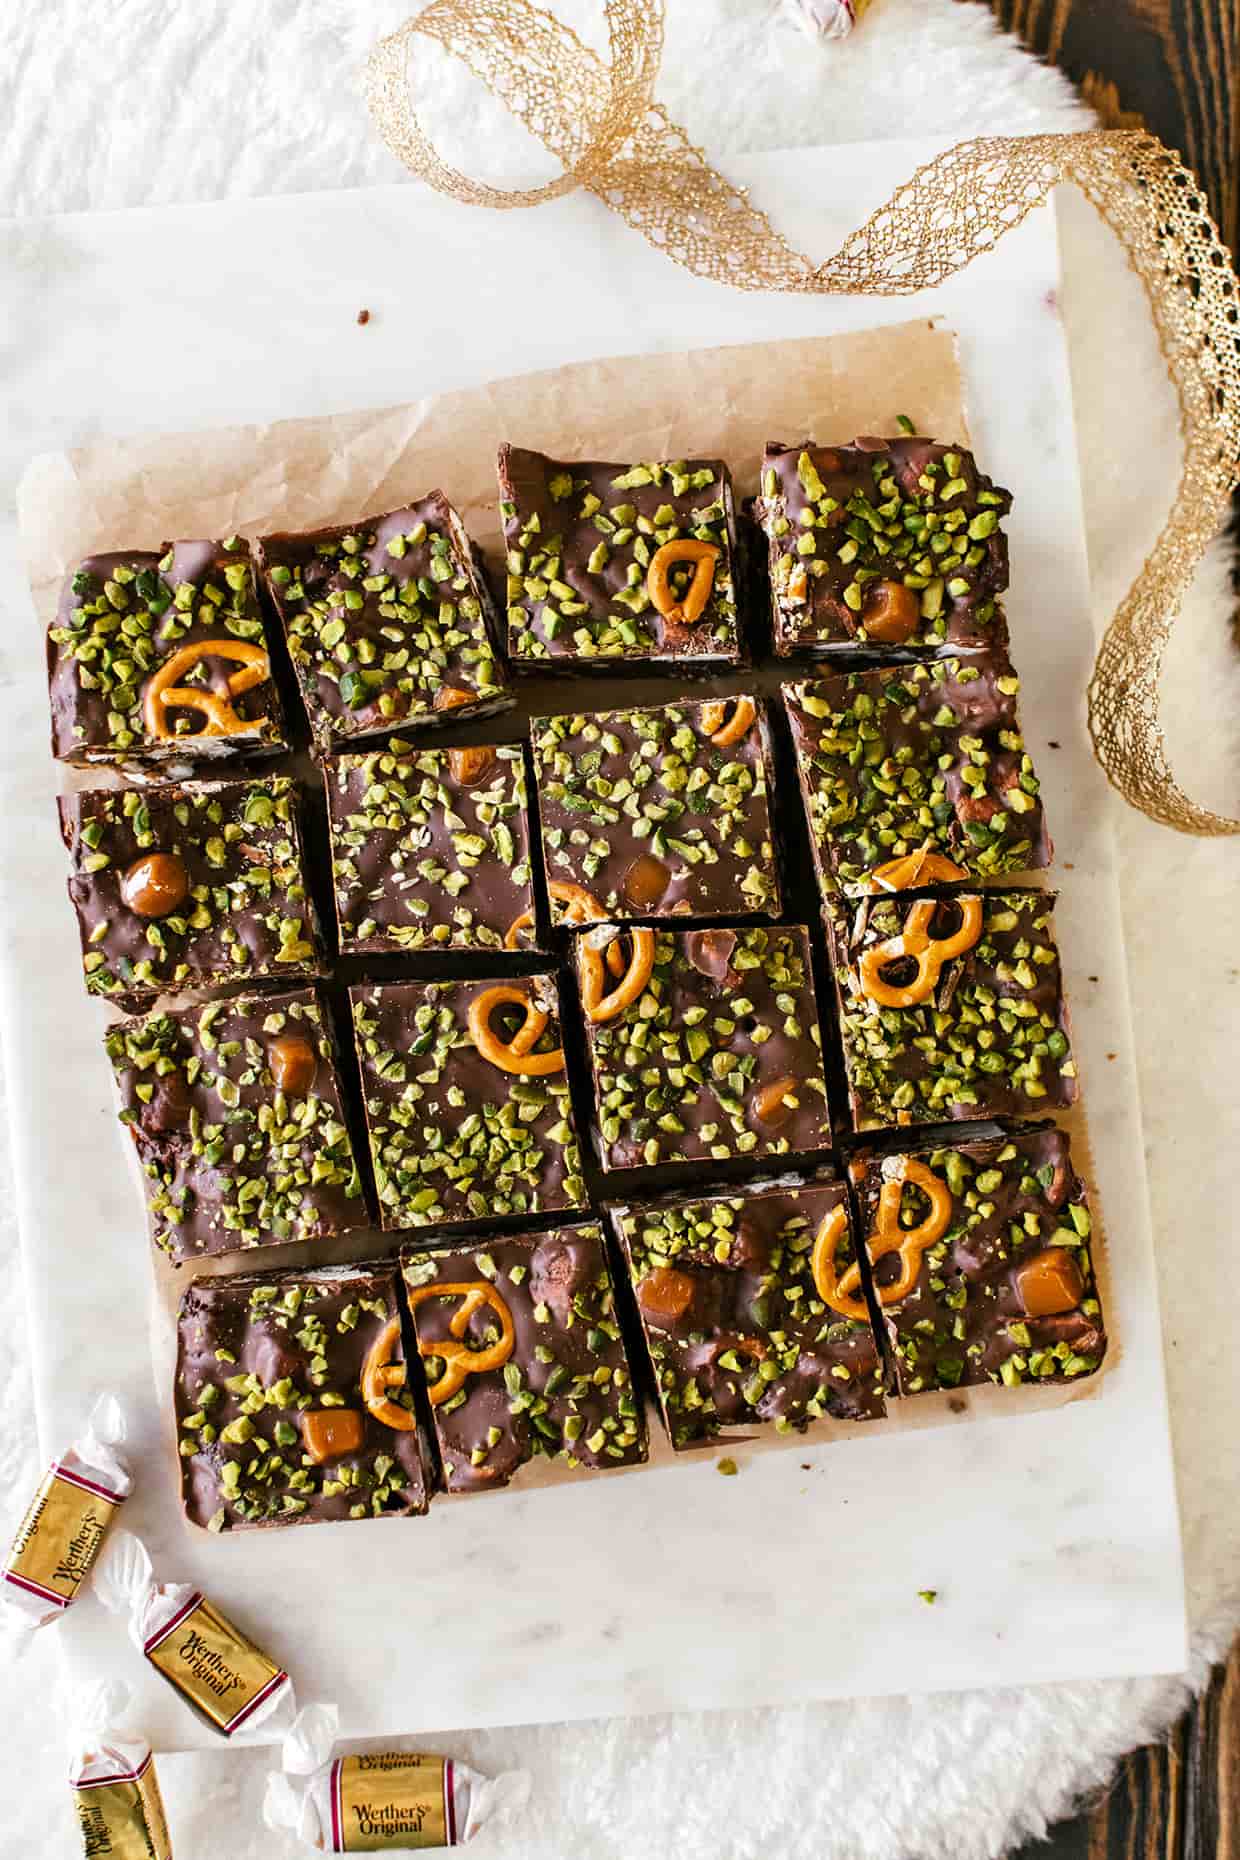 top view of a sliced batch of chocolate rocky road bars, with pretzels and pistachios sprinkled all over